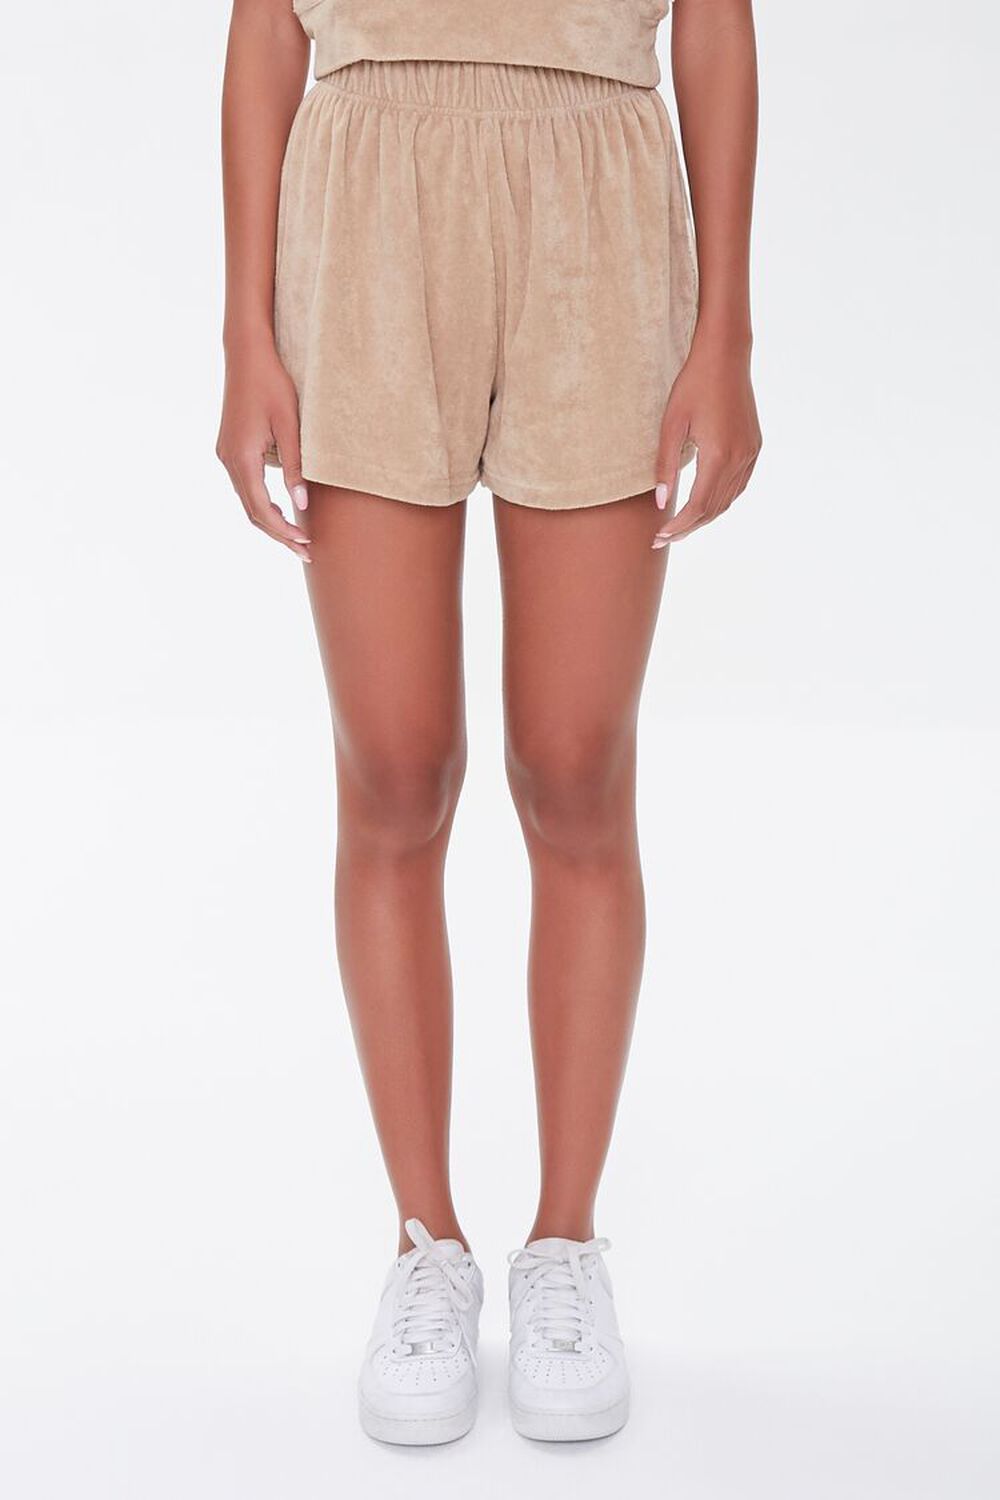 BROWN Kendall & Kylie Terrycloth Elastic Shorts, image 2